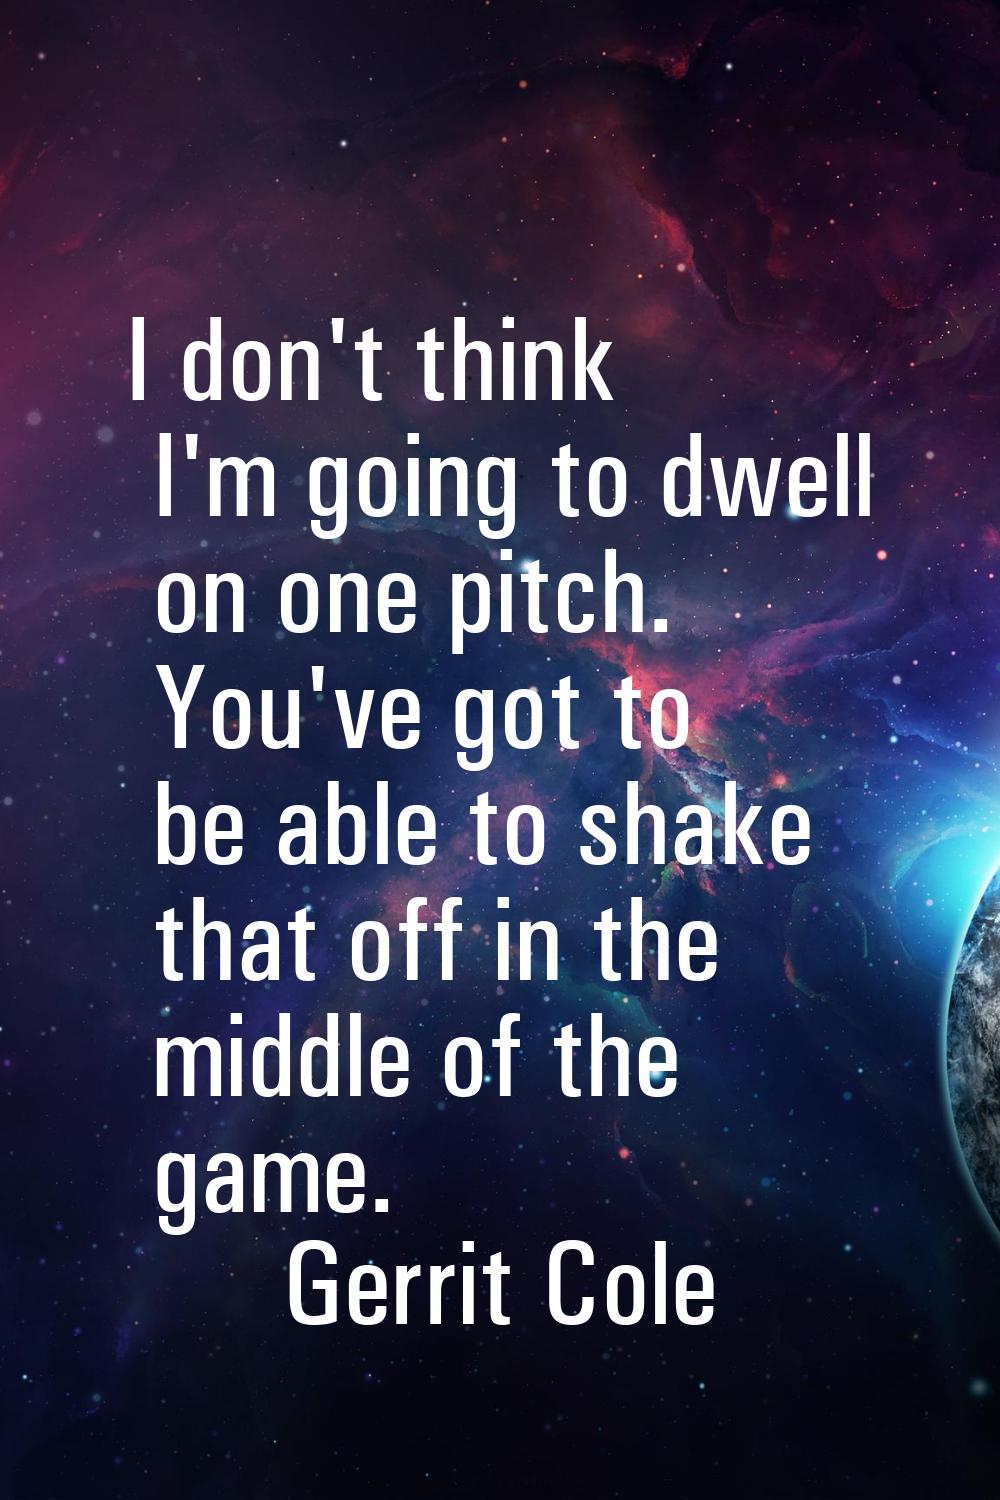 I don't think I'm going to dwell on one pitch. You've got to be able to shake that off in the middl